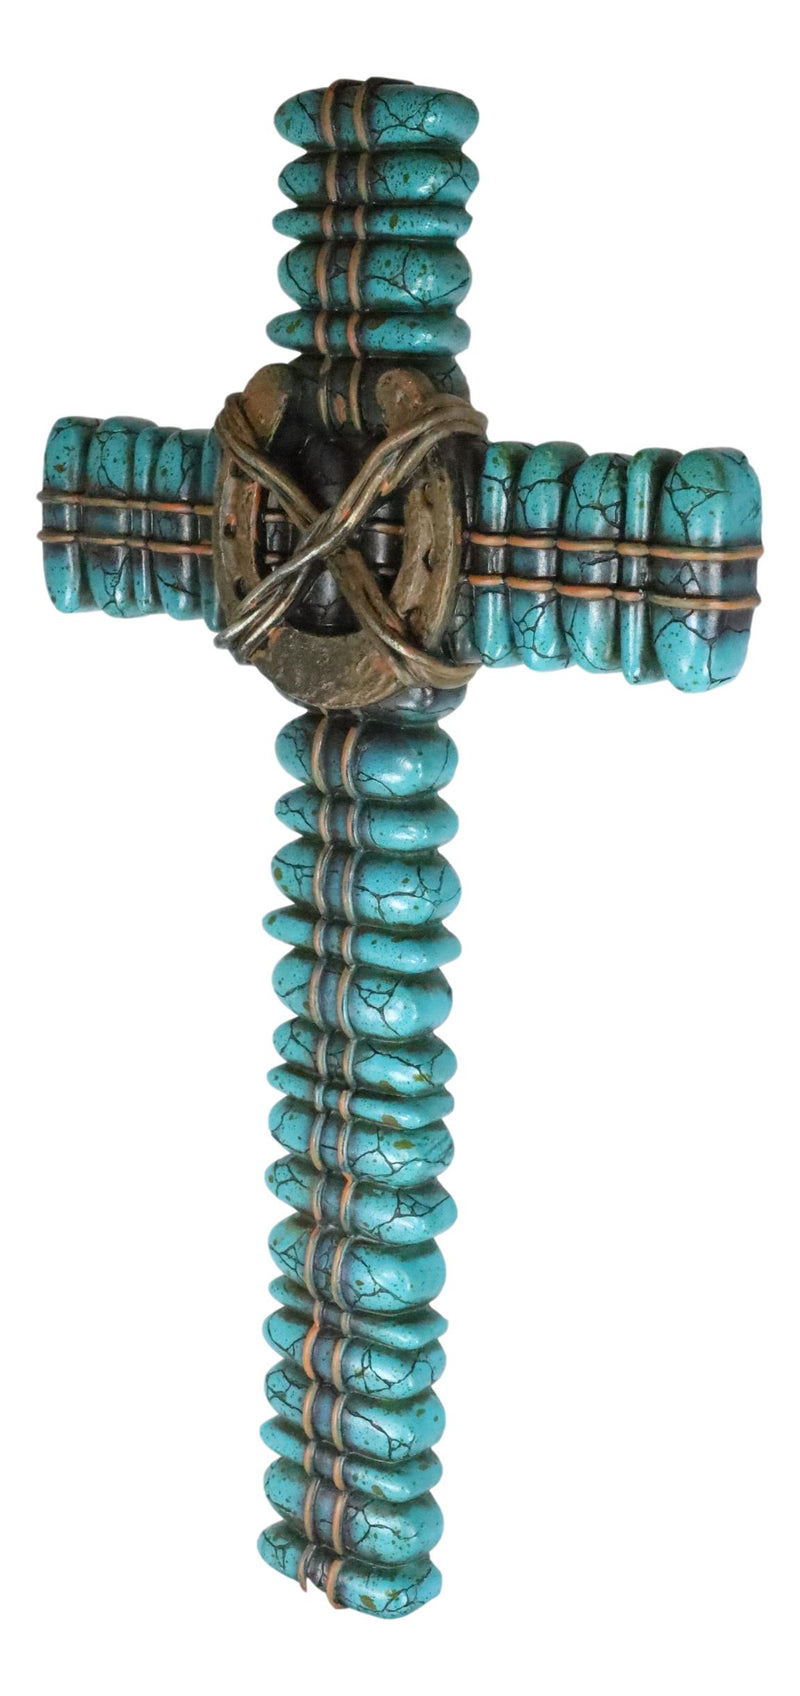 18"H Rustic Western Turquoise Pebbles Horseshoe Barbed Wires Wall Cross Plaque